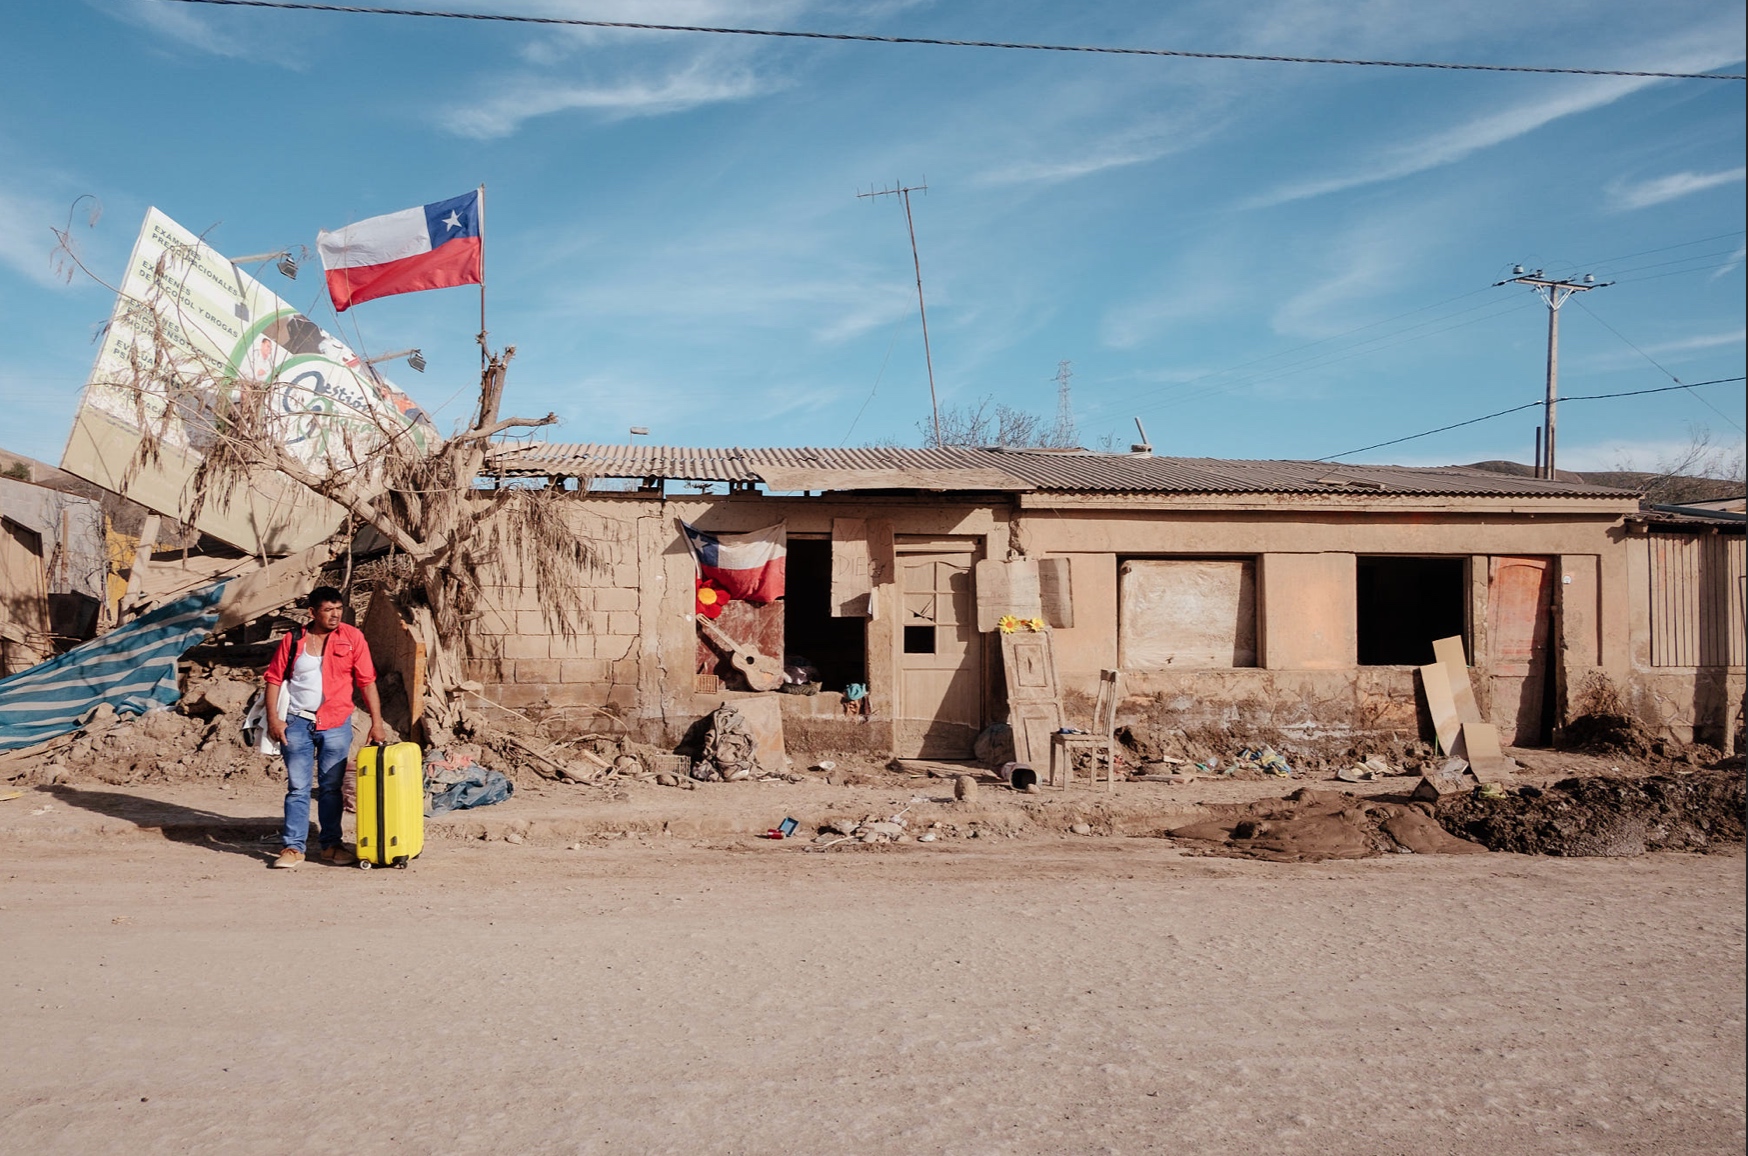 A bus to better lands - resident waiting for transport out of there, a Chilean flag waving symbolically in the air. 